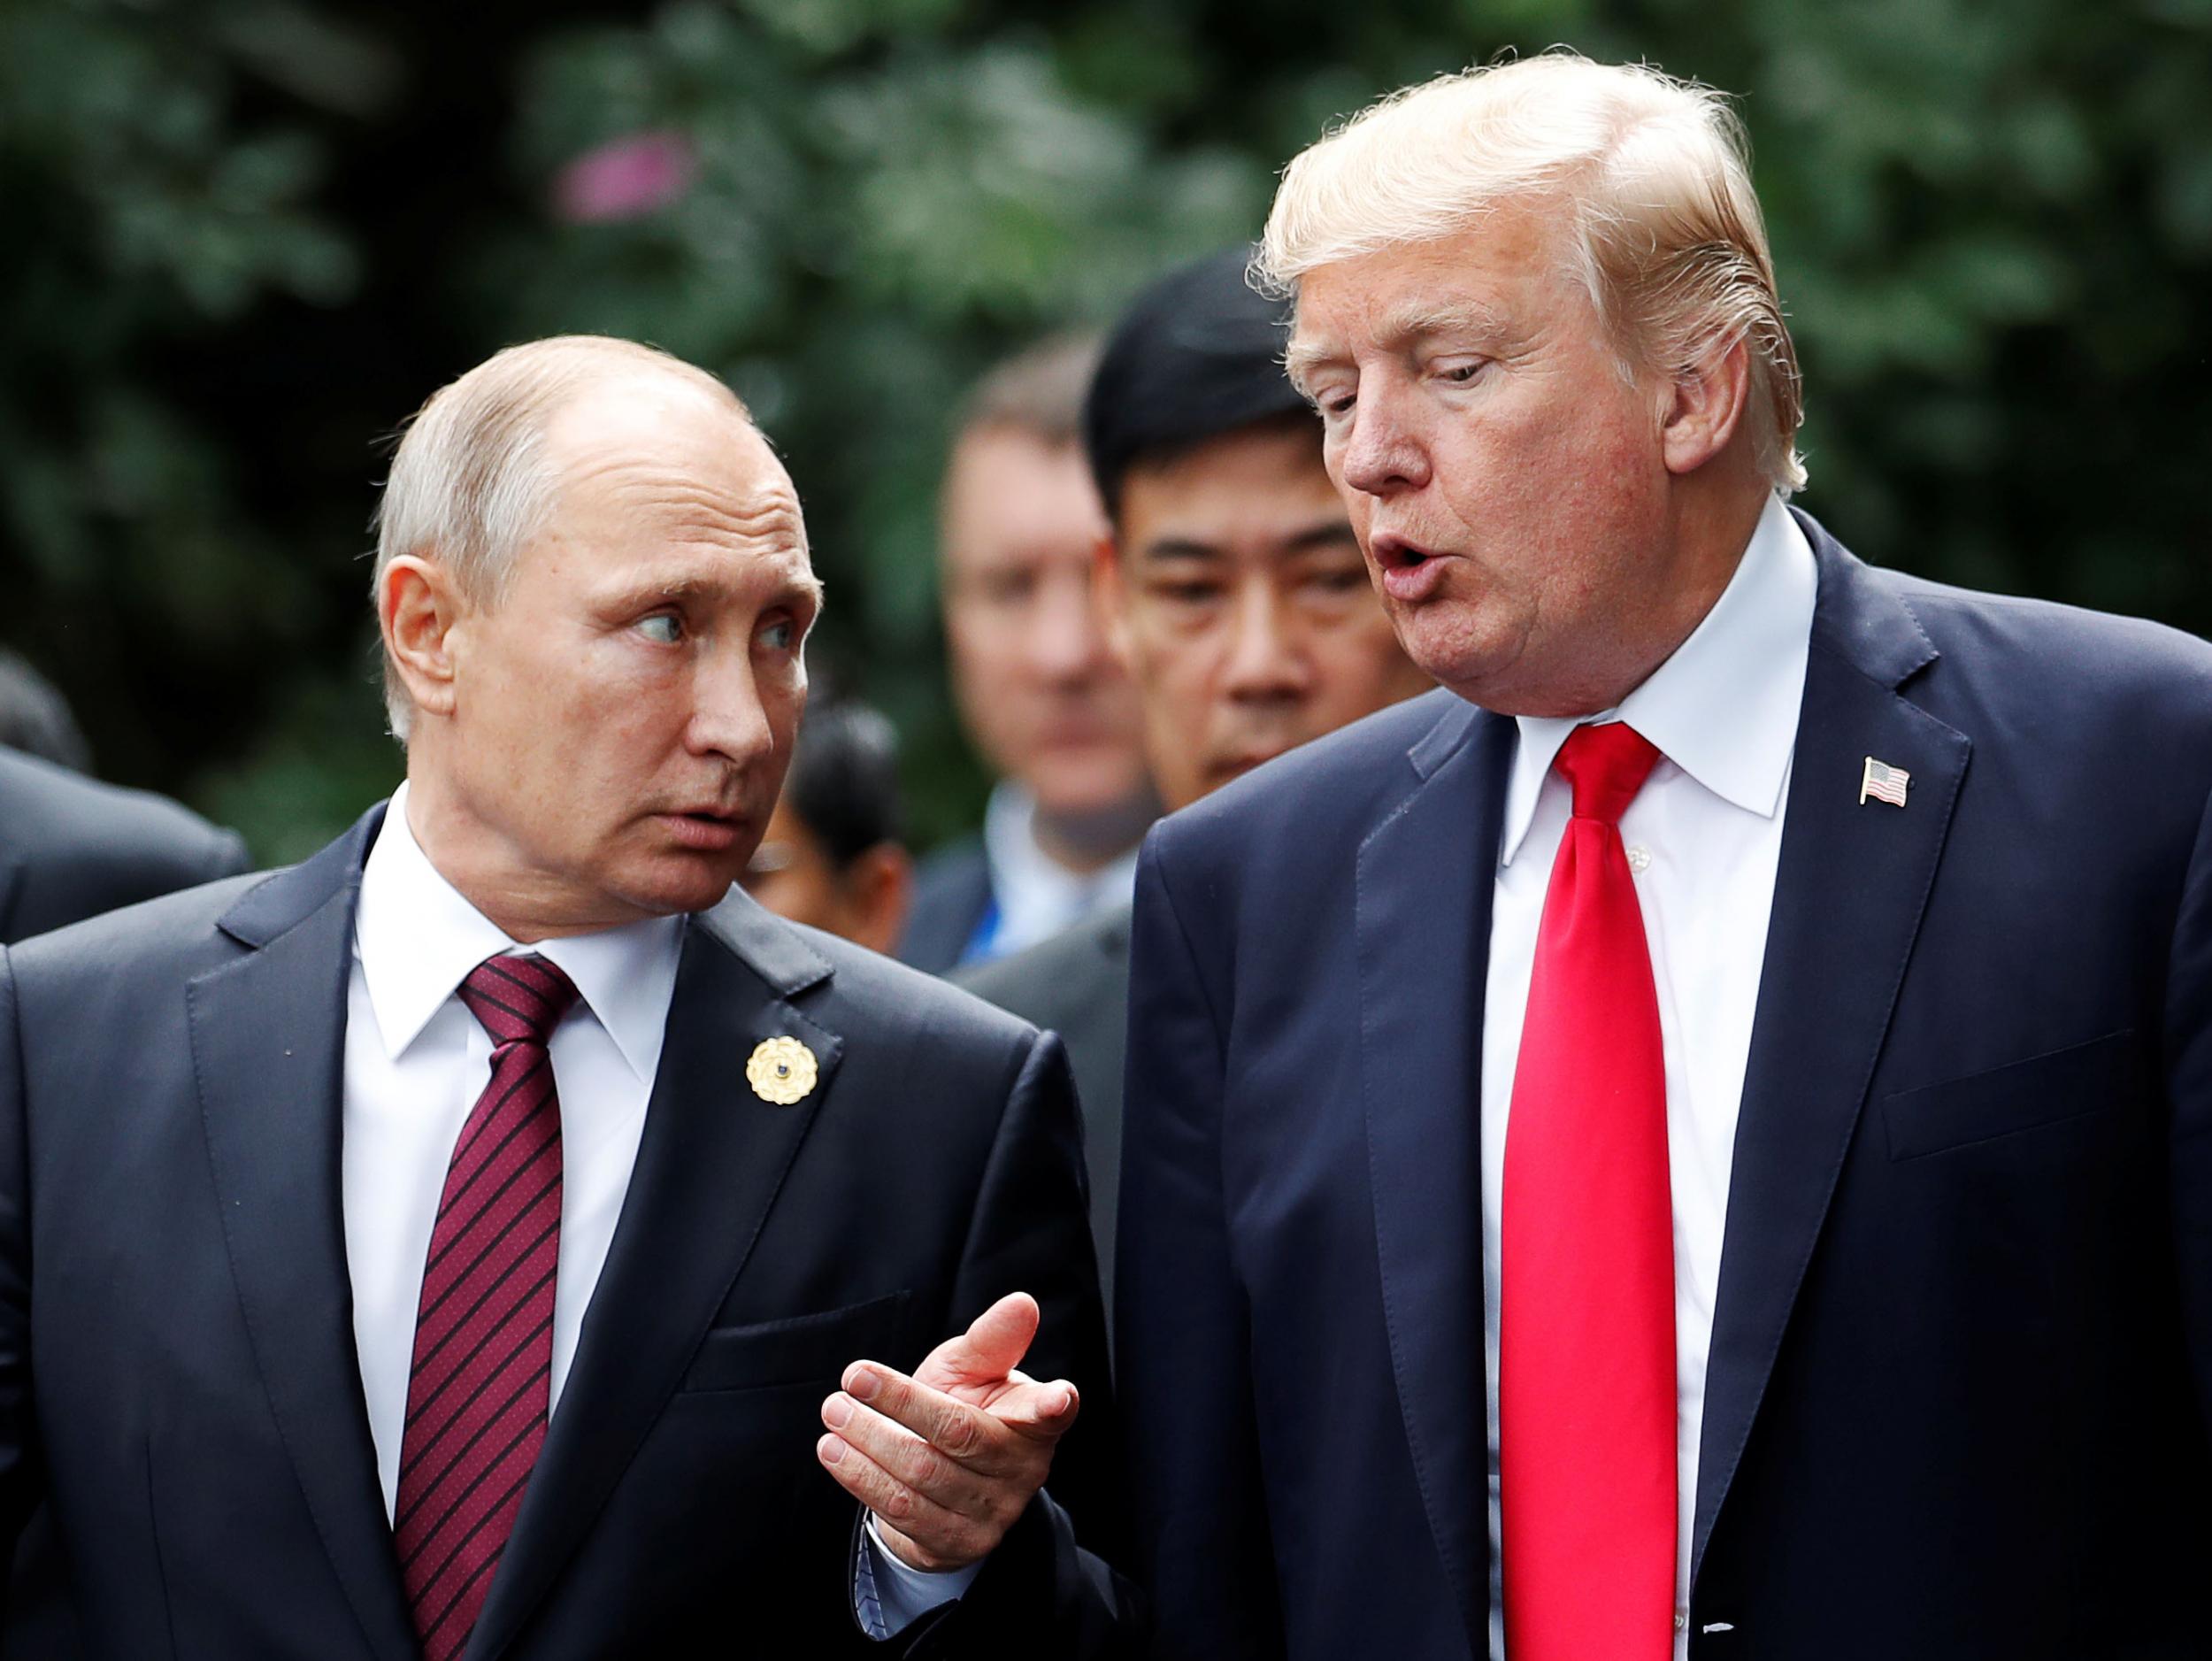 Both Trump and Putin emphasised the chance for new more friendly relations between Russia and the US, and simultaneously asserted their full commitment to the arms race